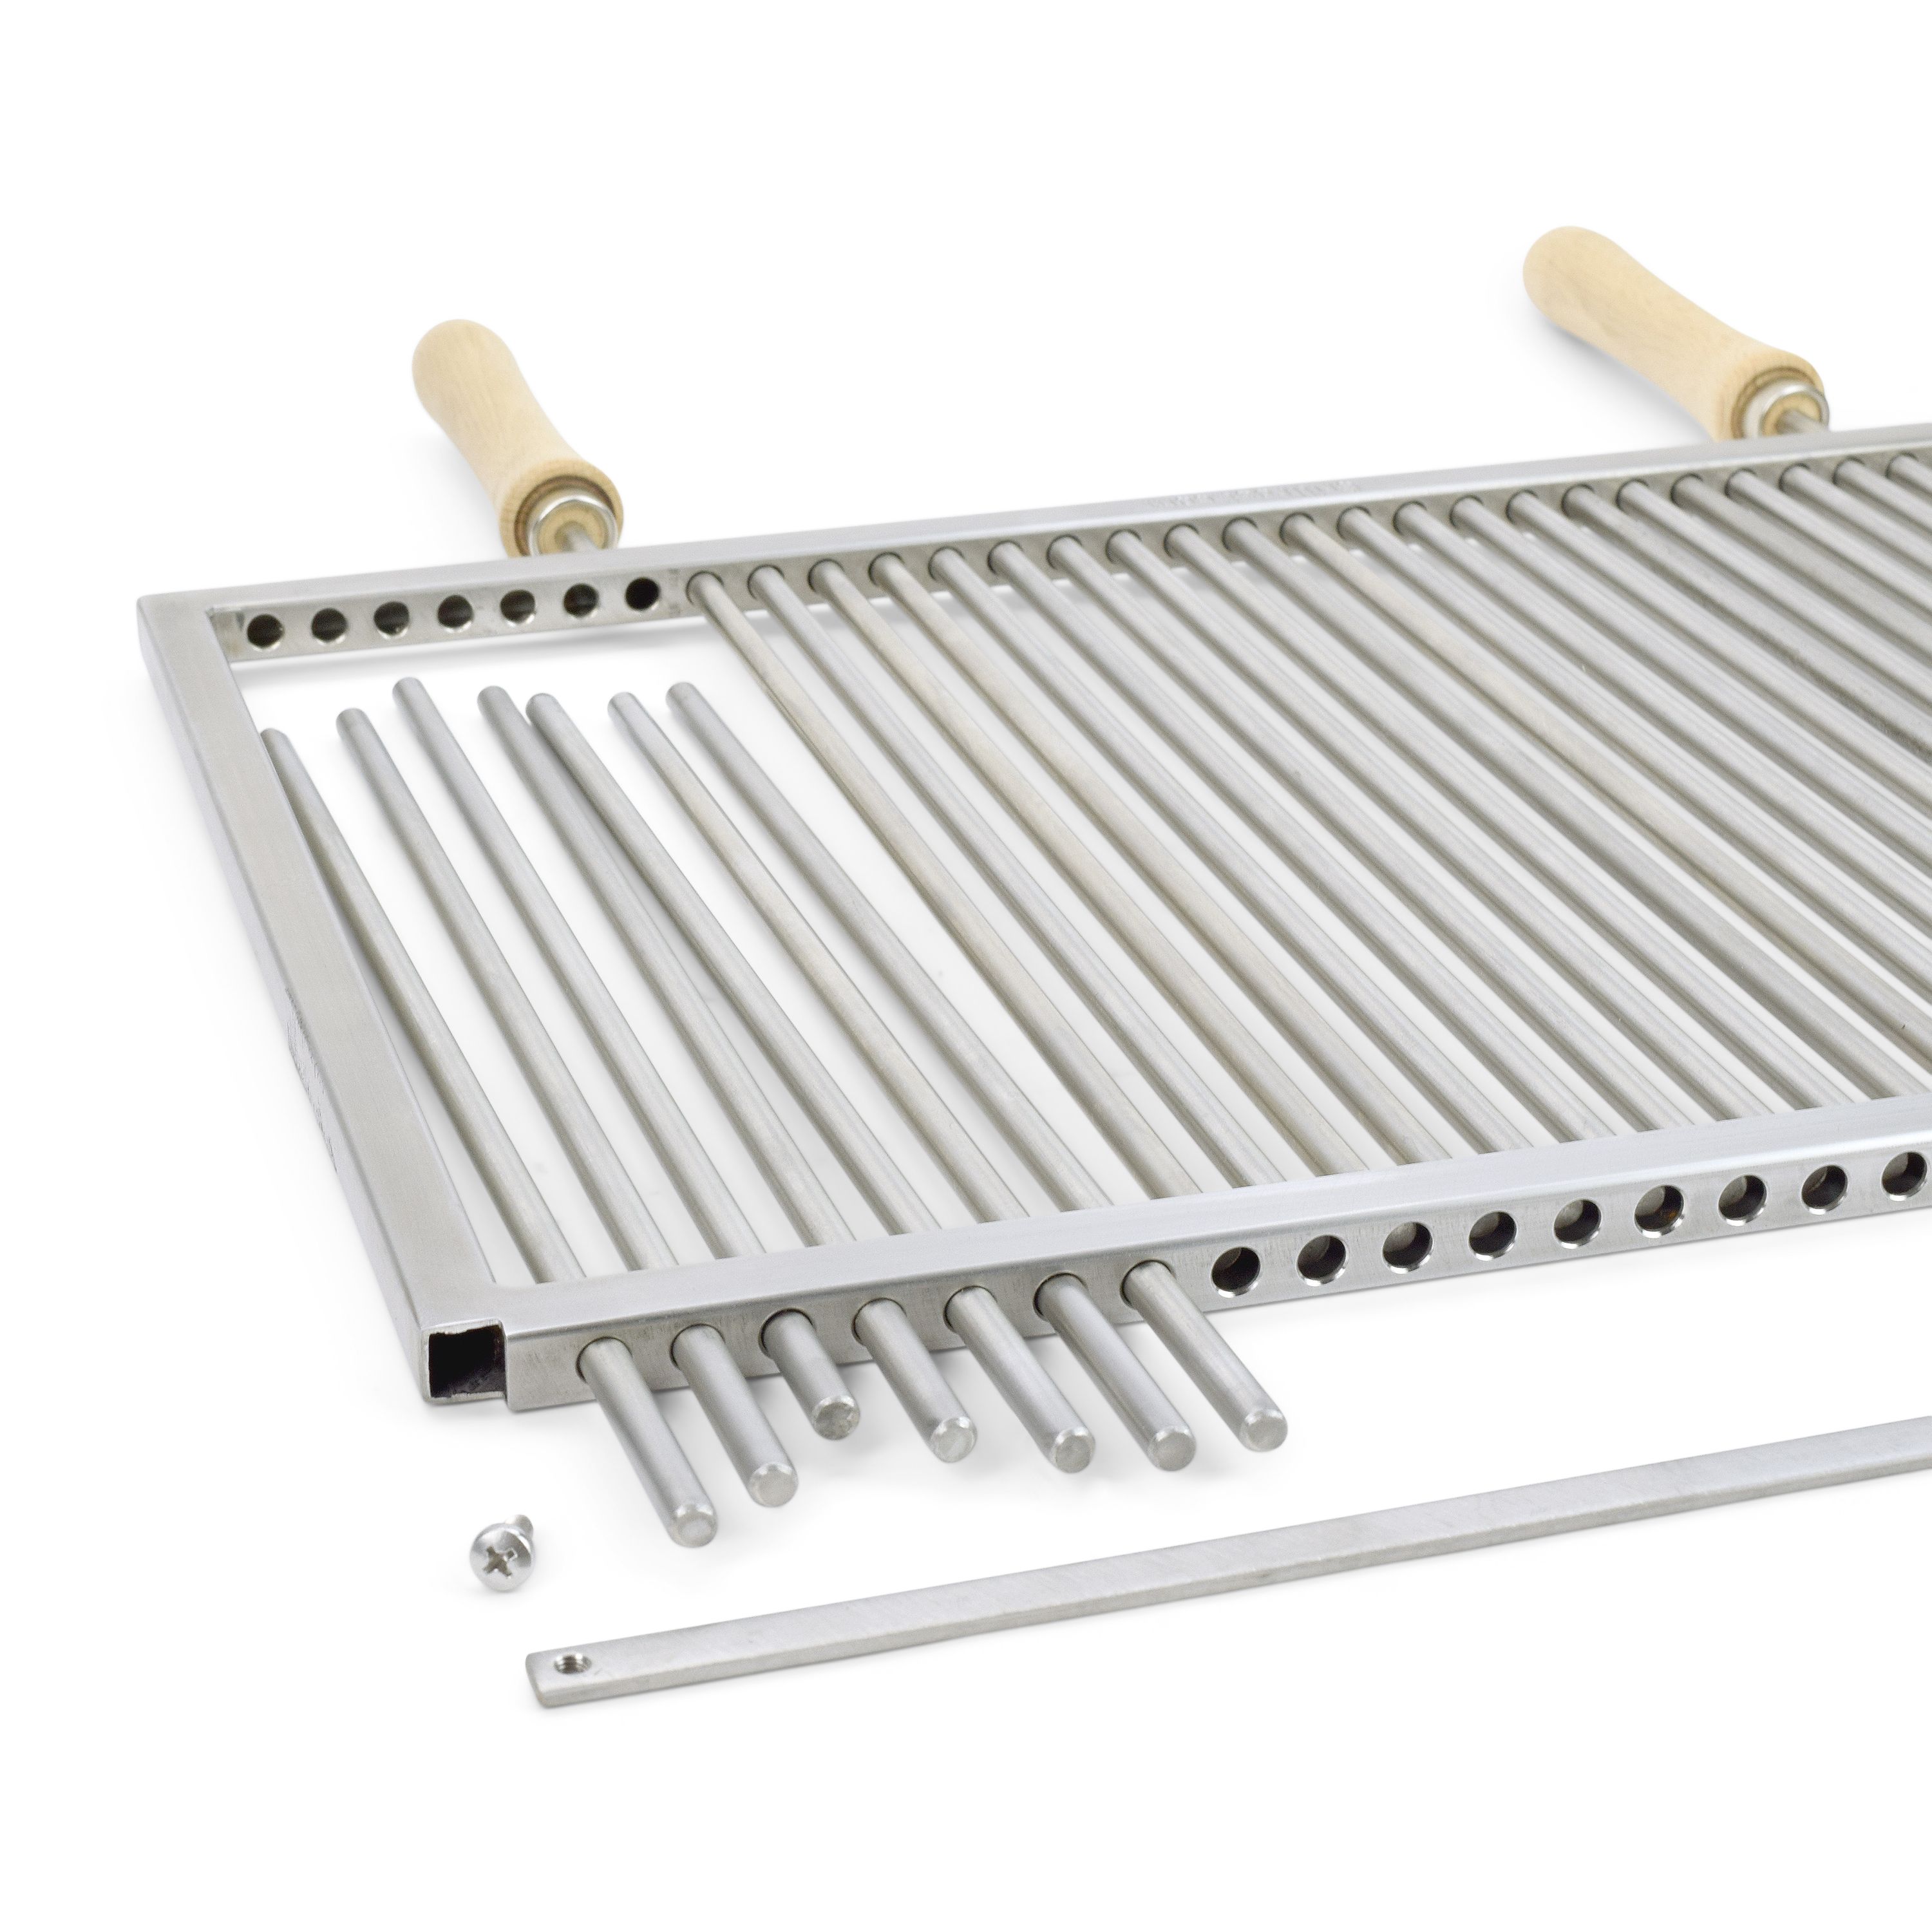 Barbecue grill made to measure ECKIG Model TEIL ZERLEGBAR made of stainless steel